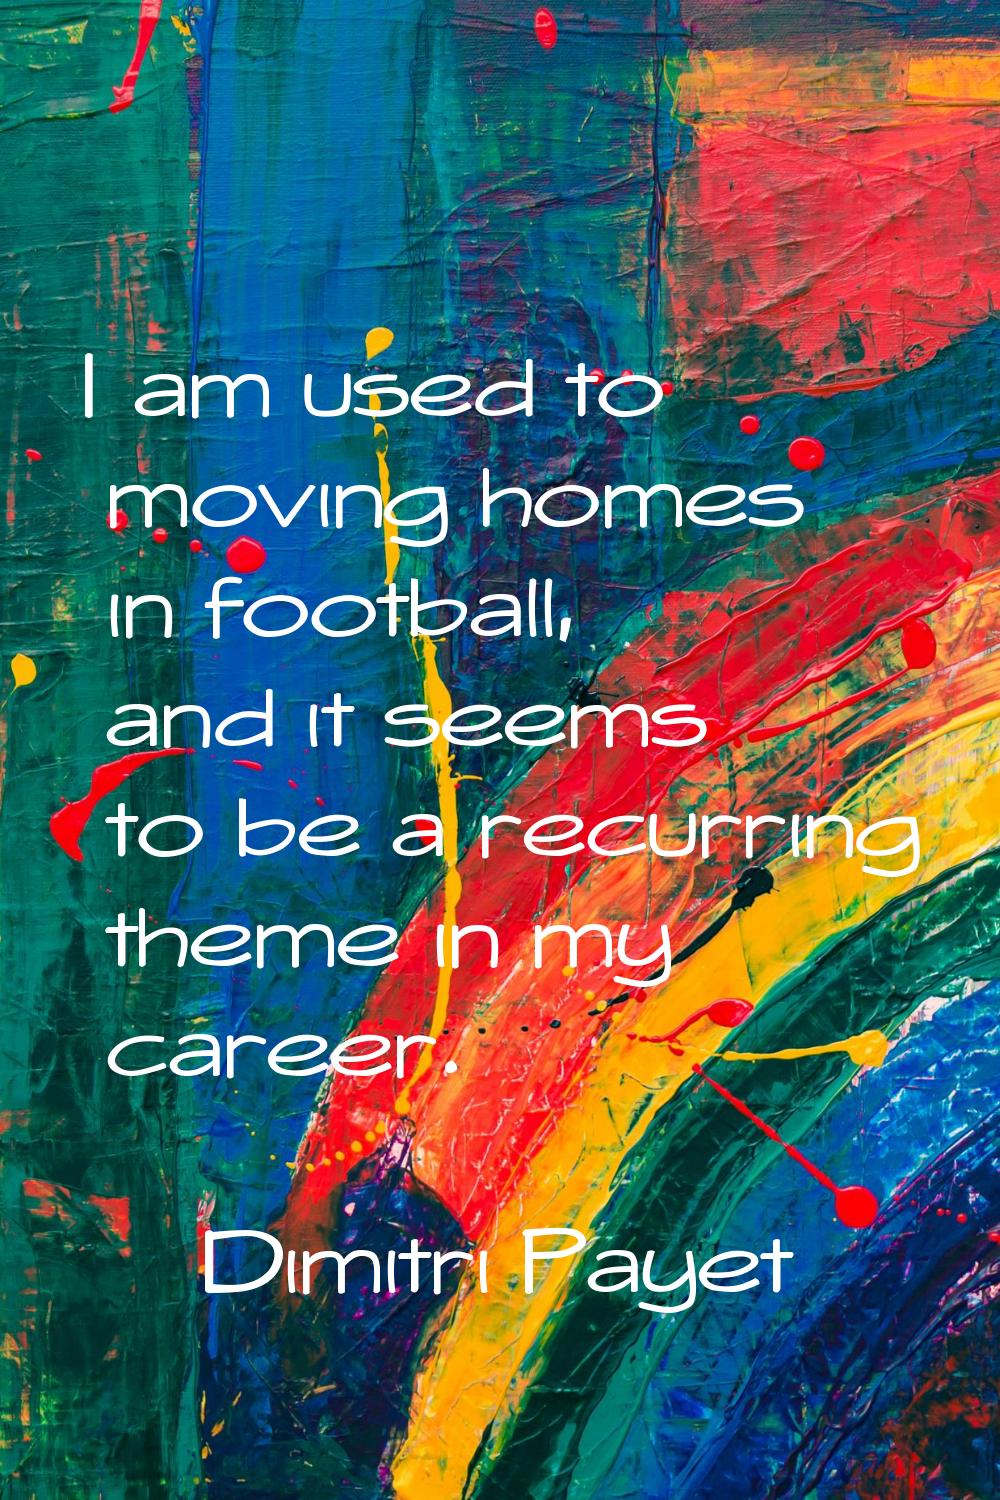 I am used to moving homes in football, and it seems to be a recurring theme in my career.